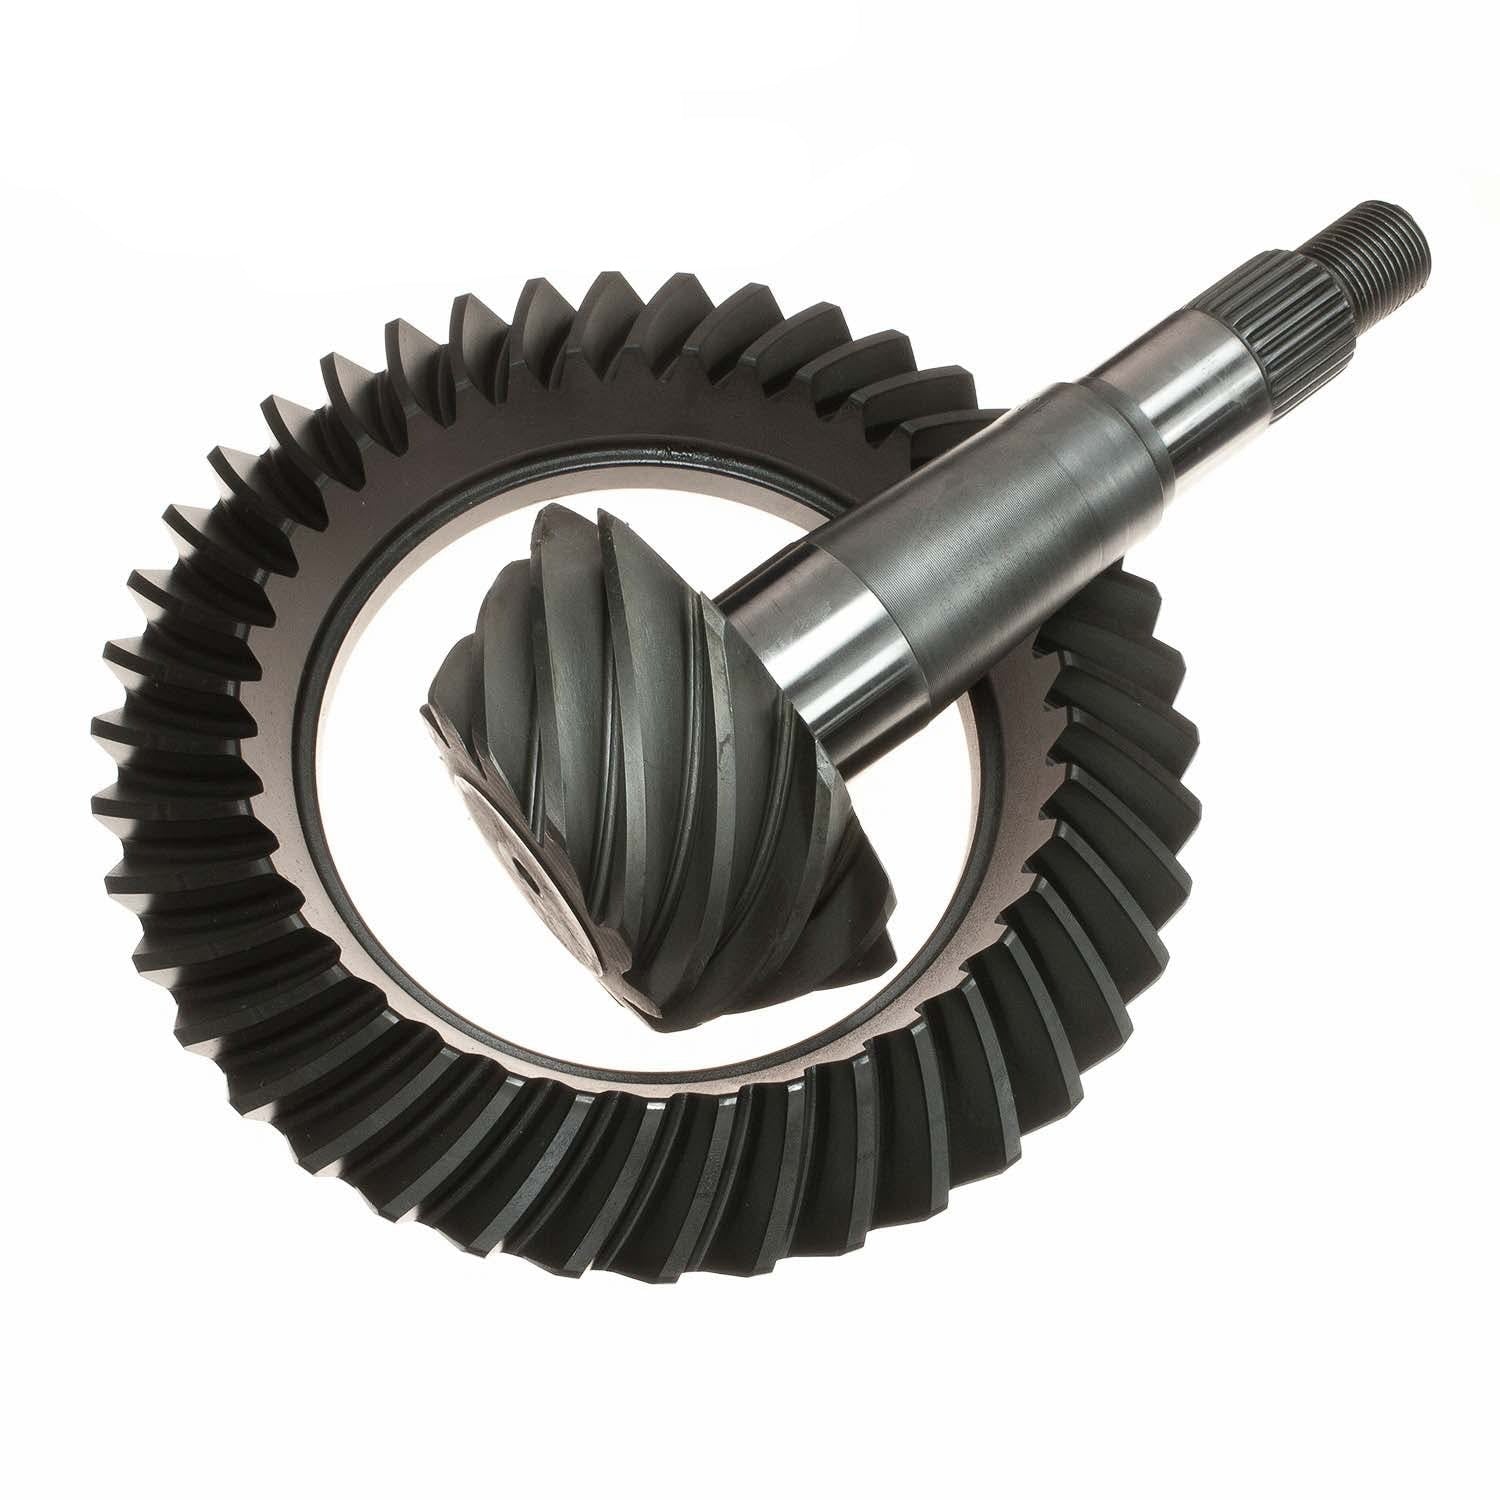 Excel CR825456 Differential Ring and Pinion